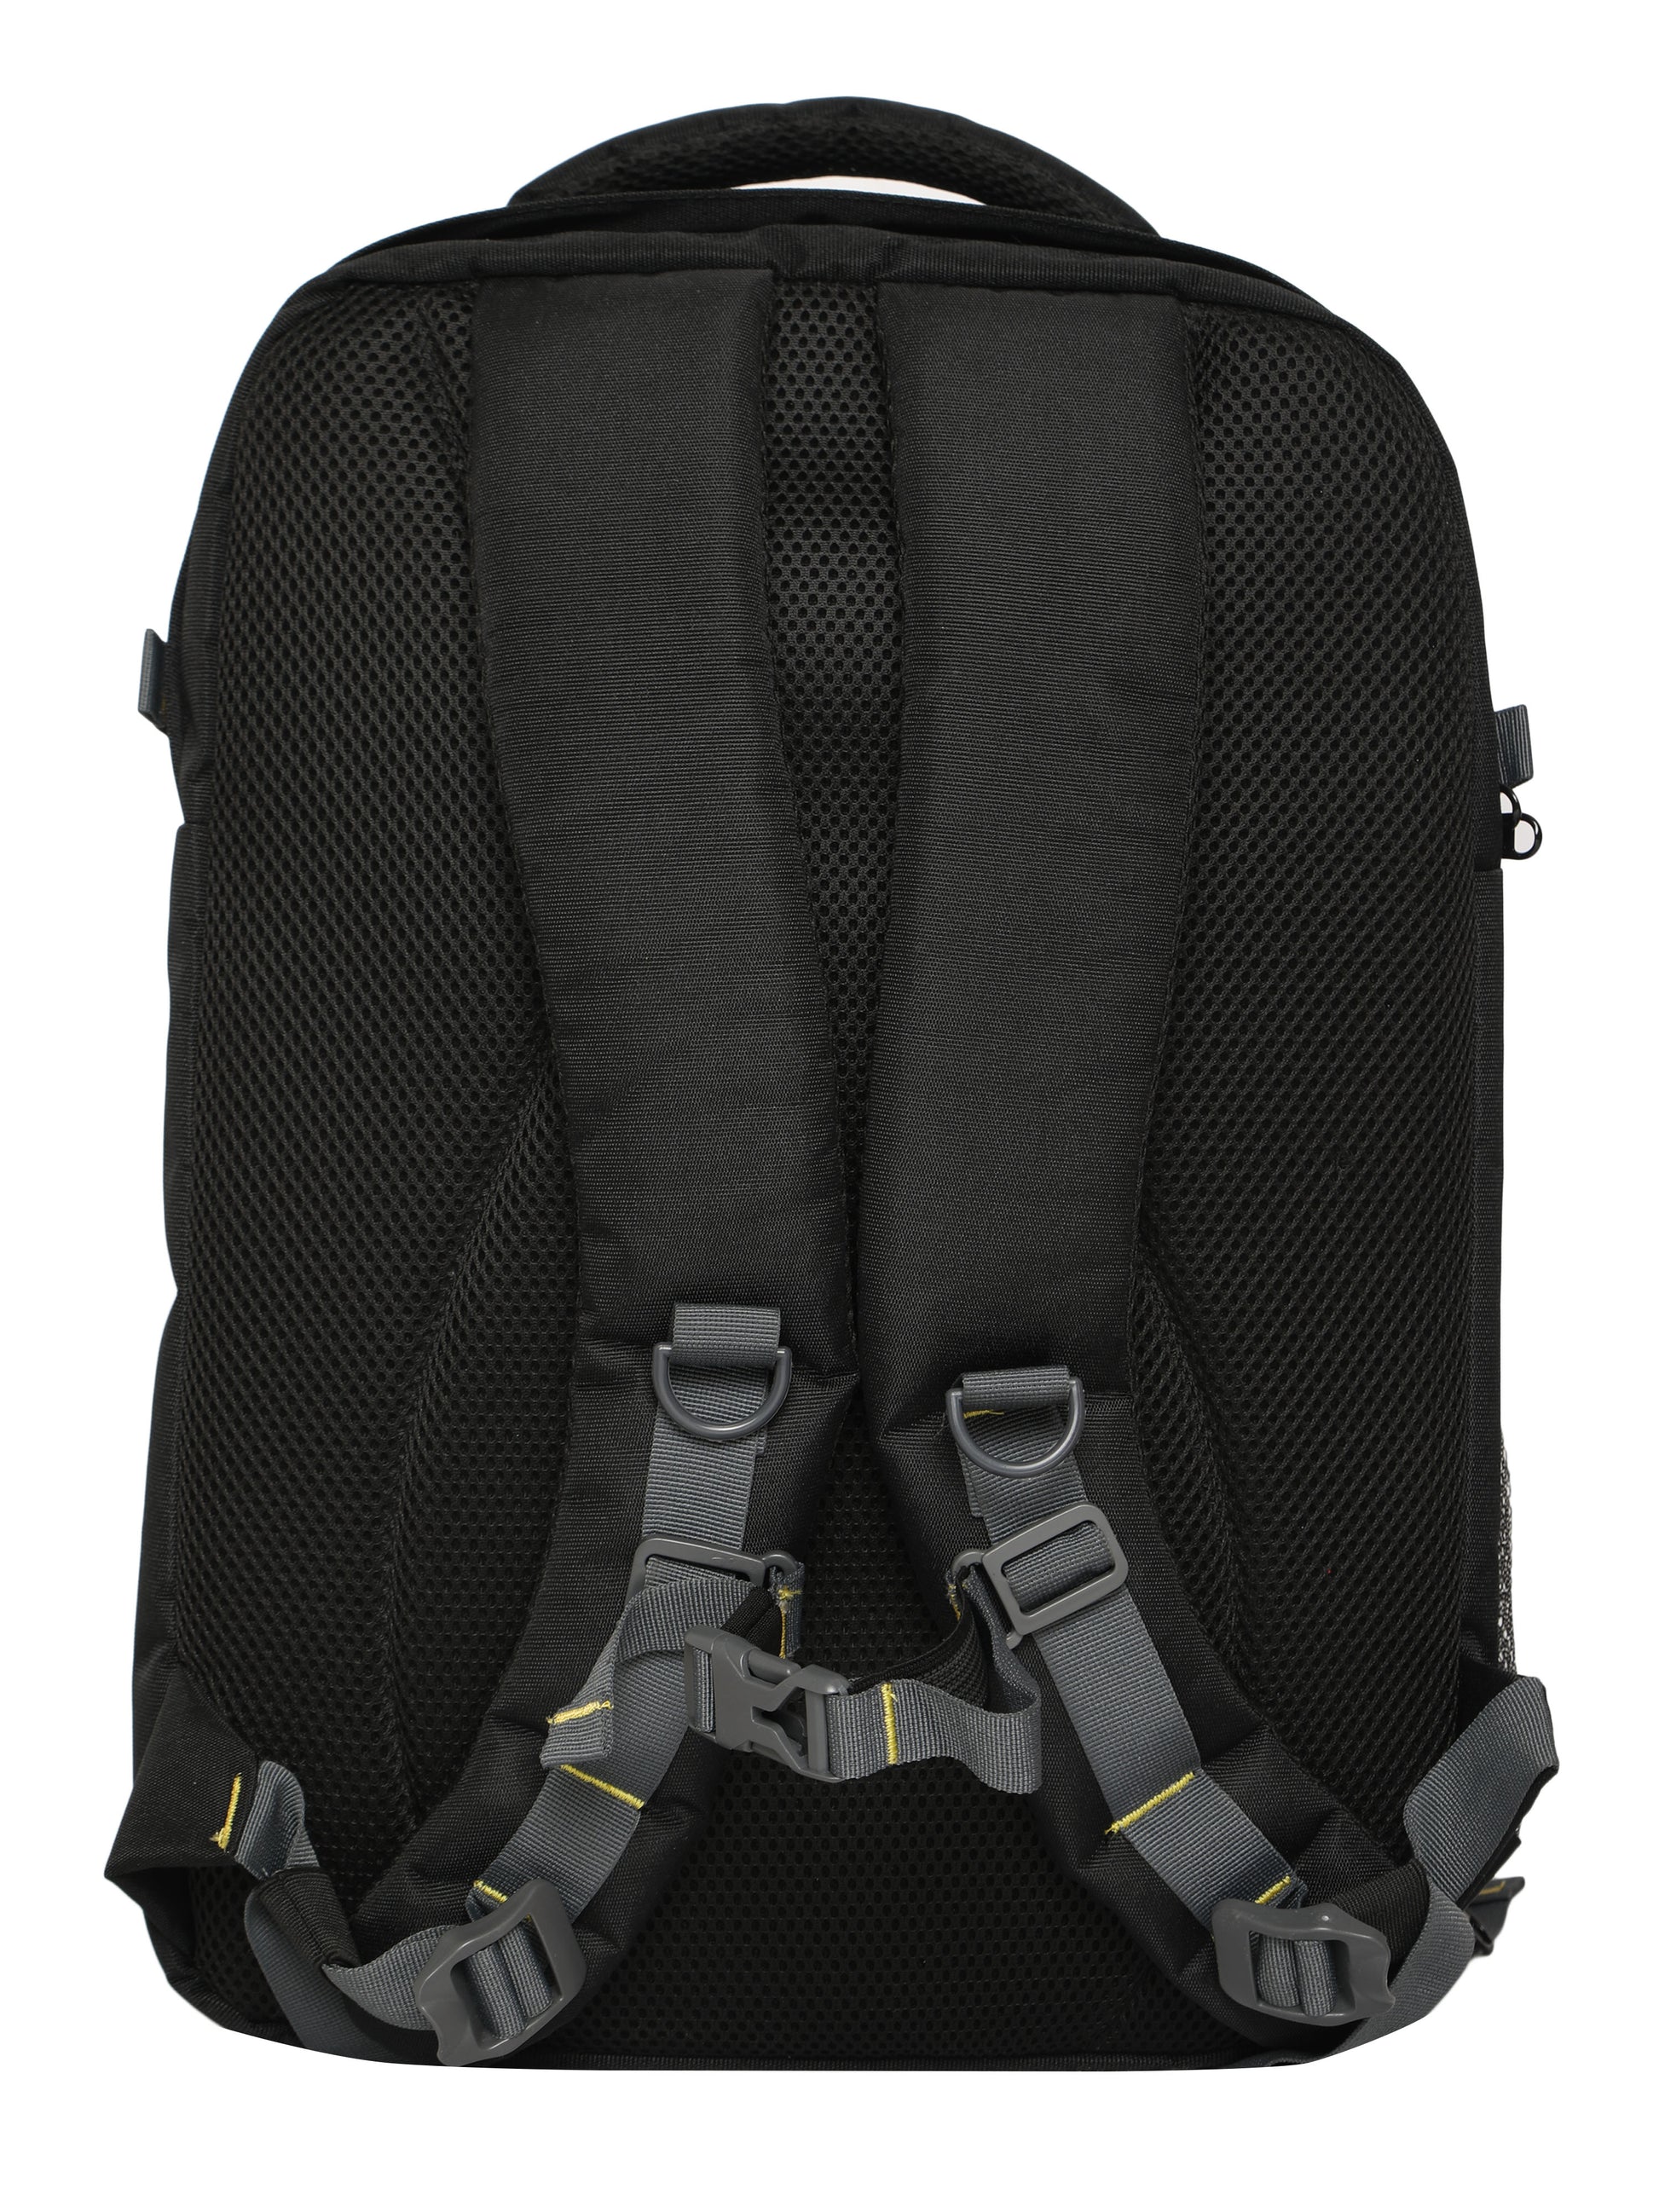 Back view of the G11 Victory DSLR camera bag, showcasing its ergonomic design with padded shoulder straps and a breathable mesh panel. The bag's thoughtful back padding and adjustable chest strap ensure comfort and support during long photography sessions. Durable construction and a waterproof exterior provide reliable protection for valuable camera gear.